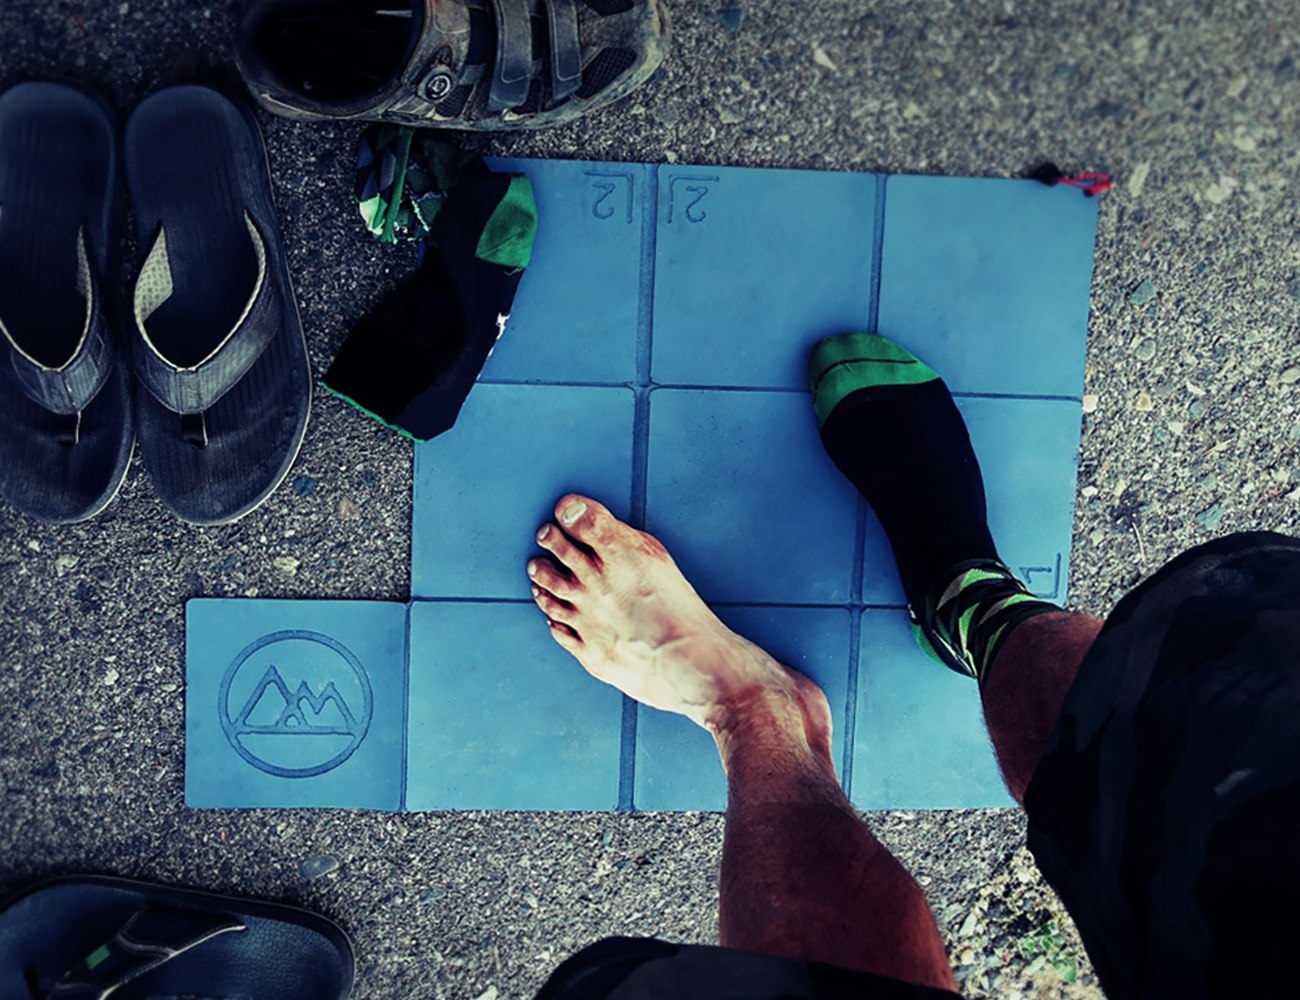 ADVENTURE MAT – A Clean Surface Wherever You Go